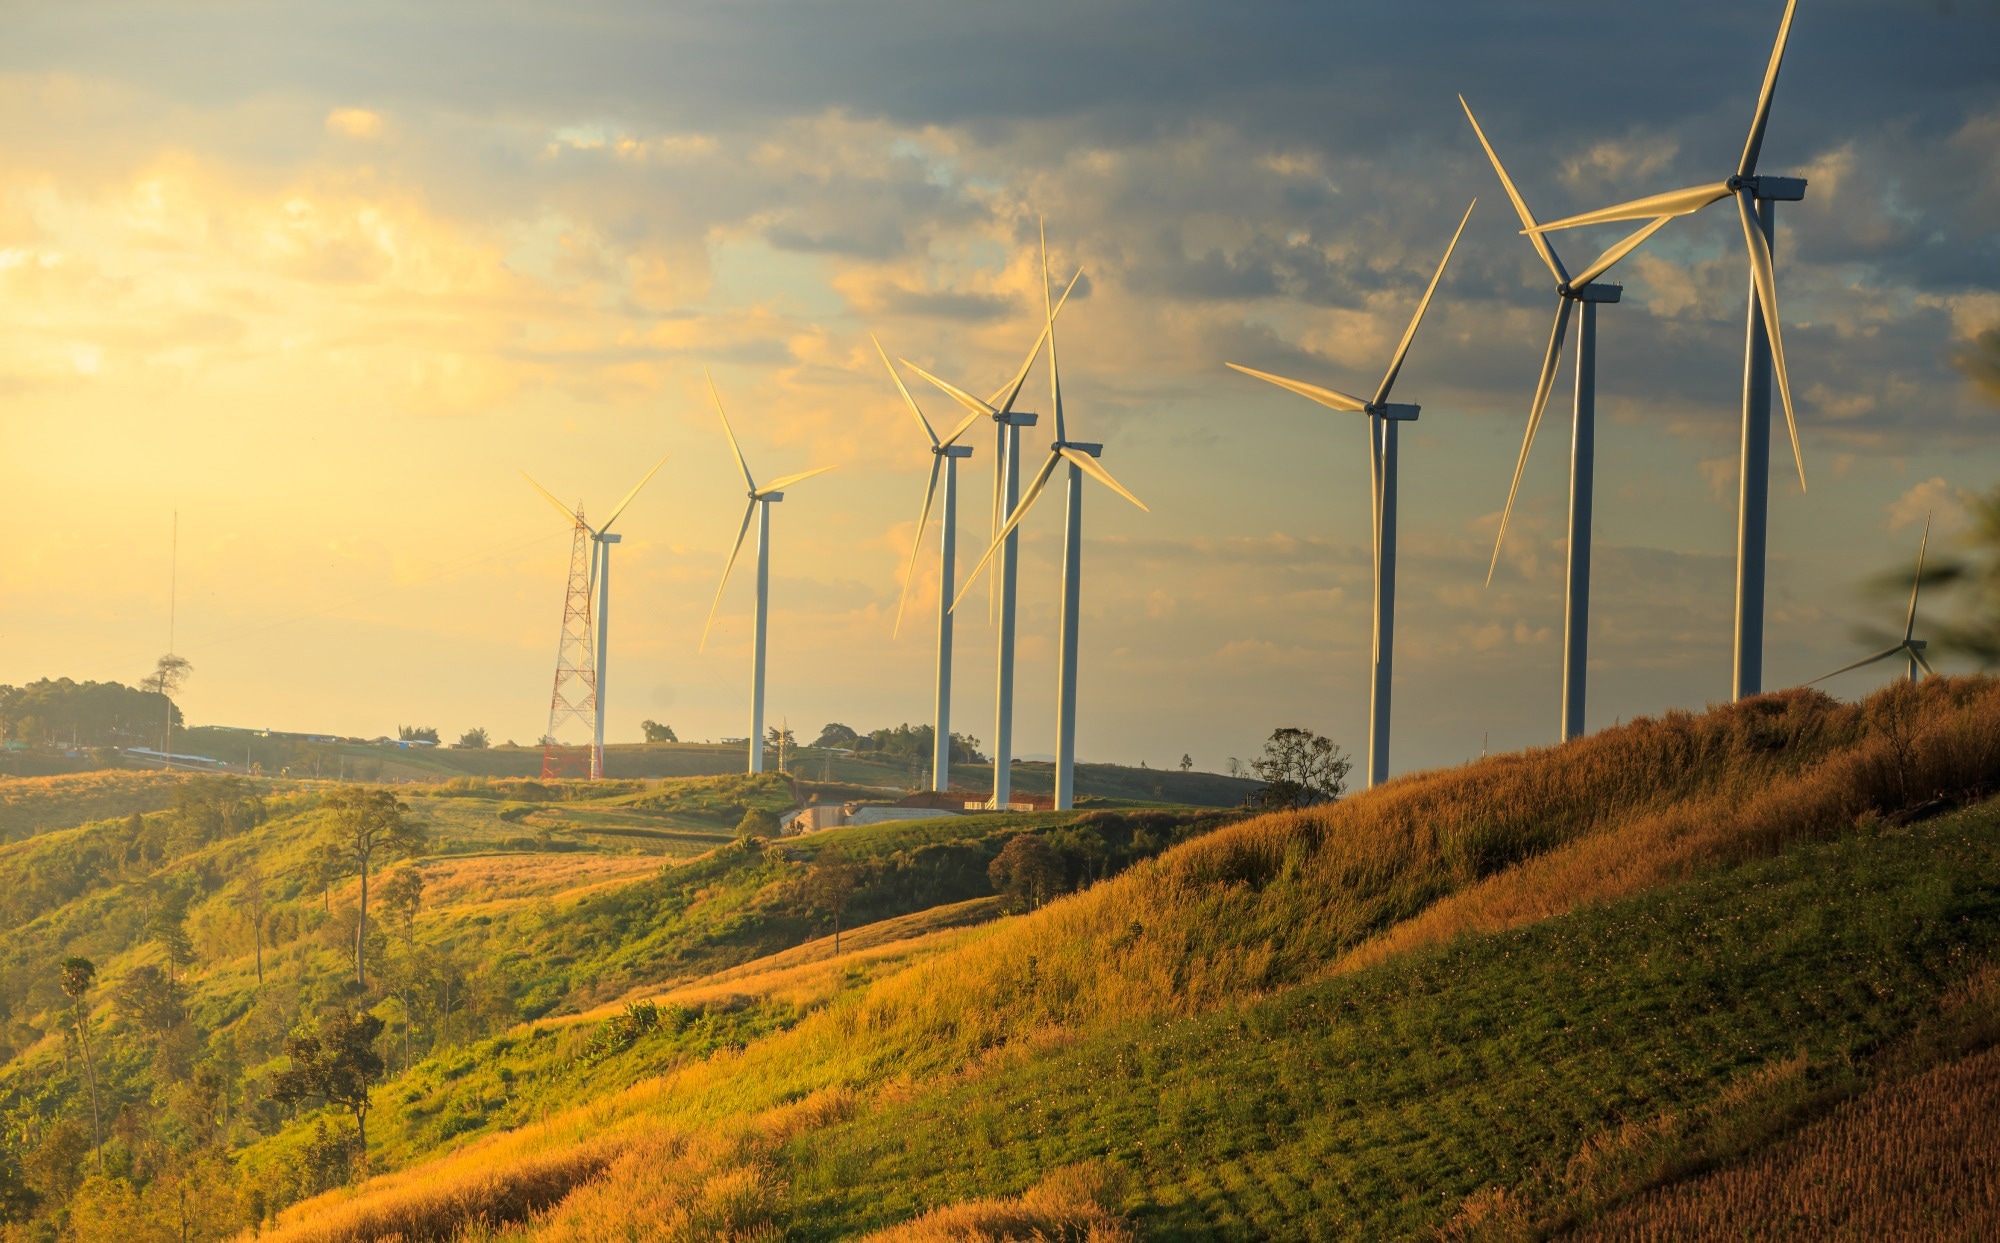 Improving Air Quality and Public Health With Wind Power